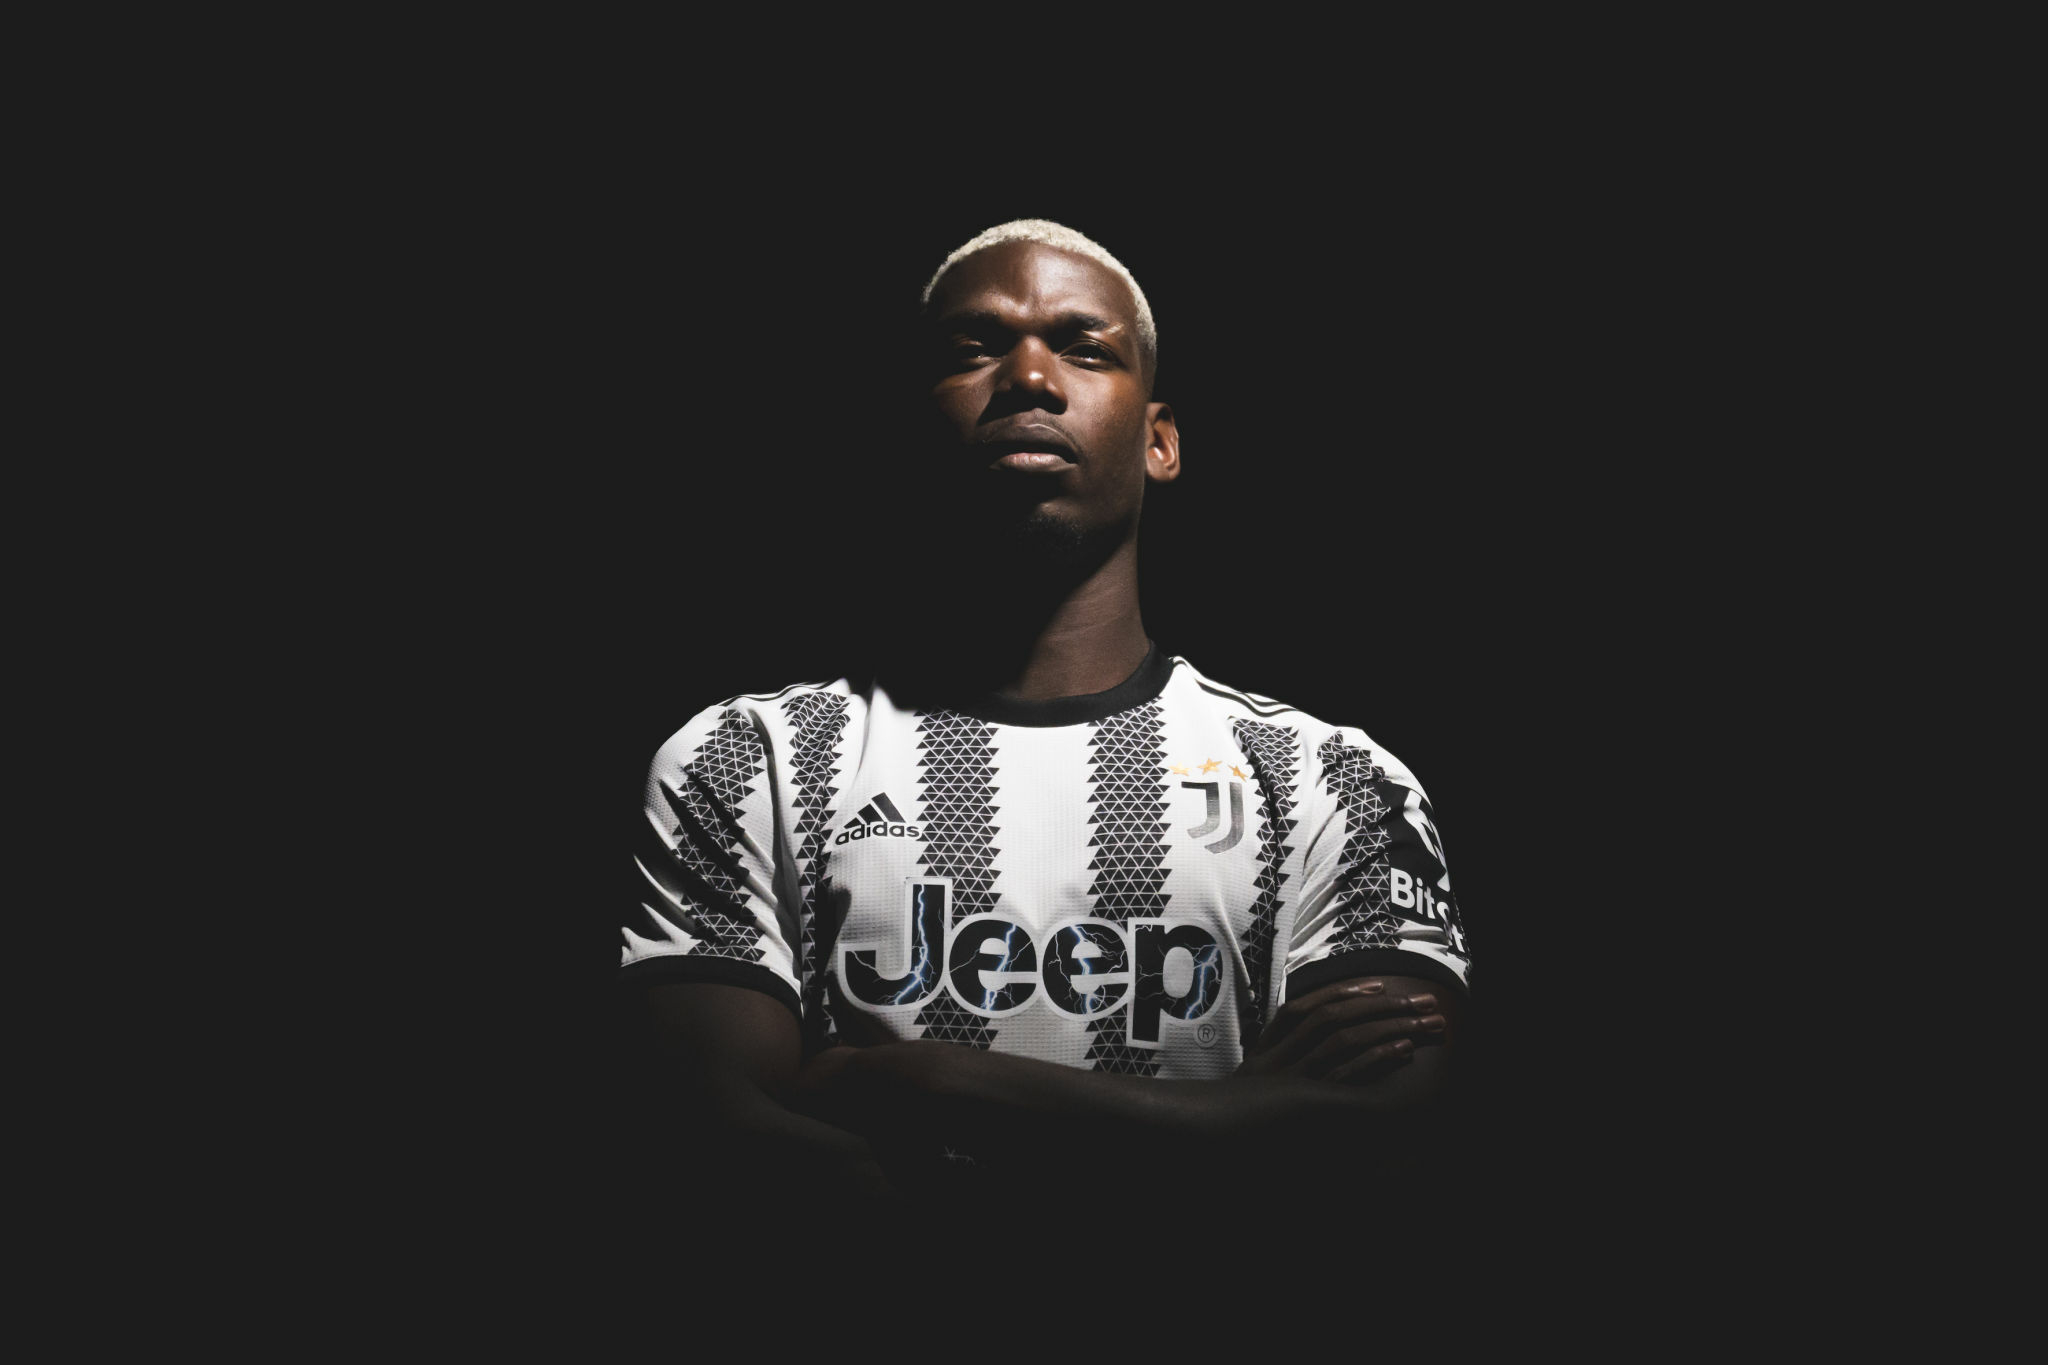 Paul Pogba Manchester United Wallpapers - Wallpaper Cave